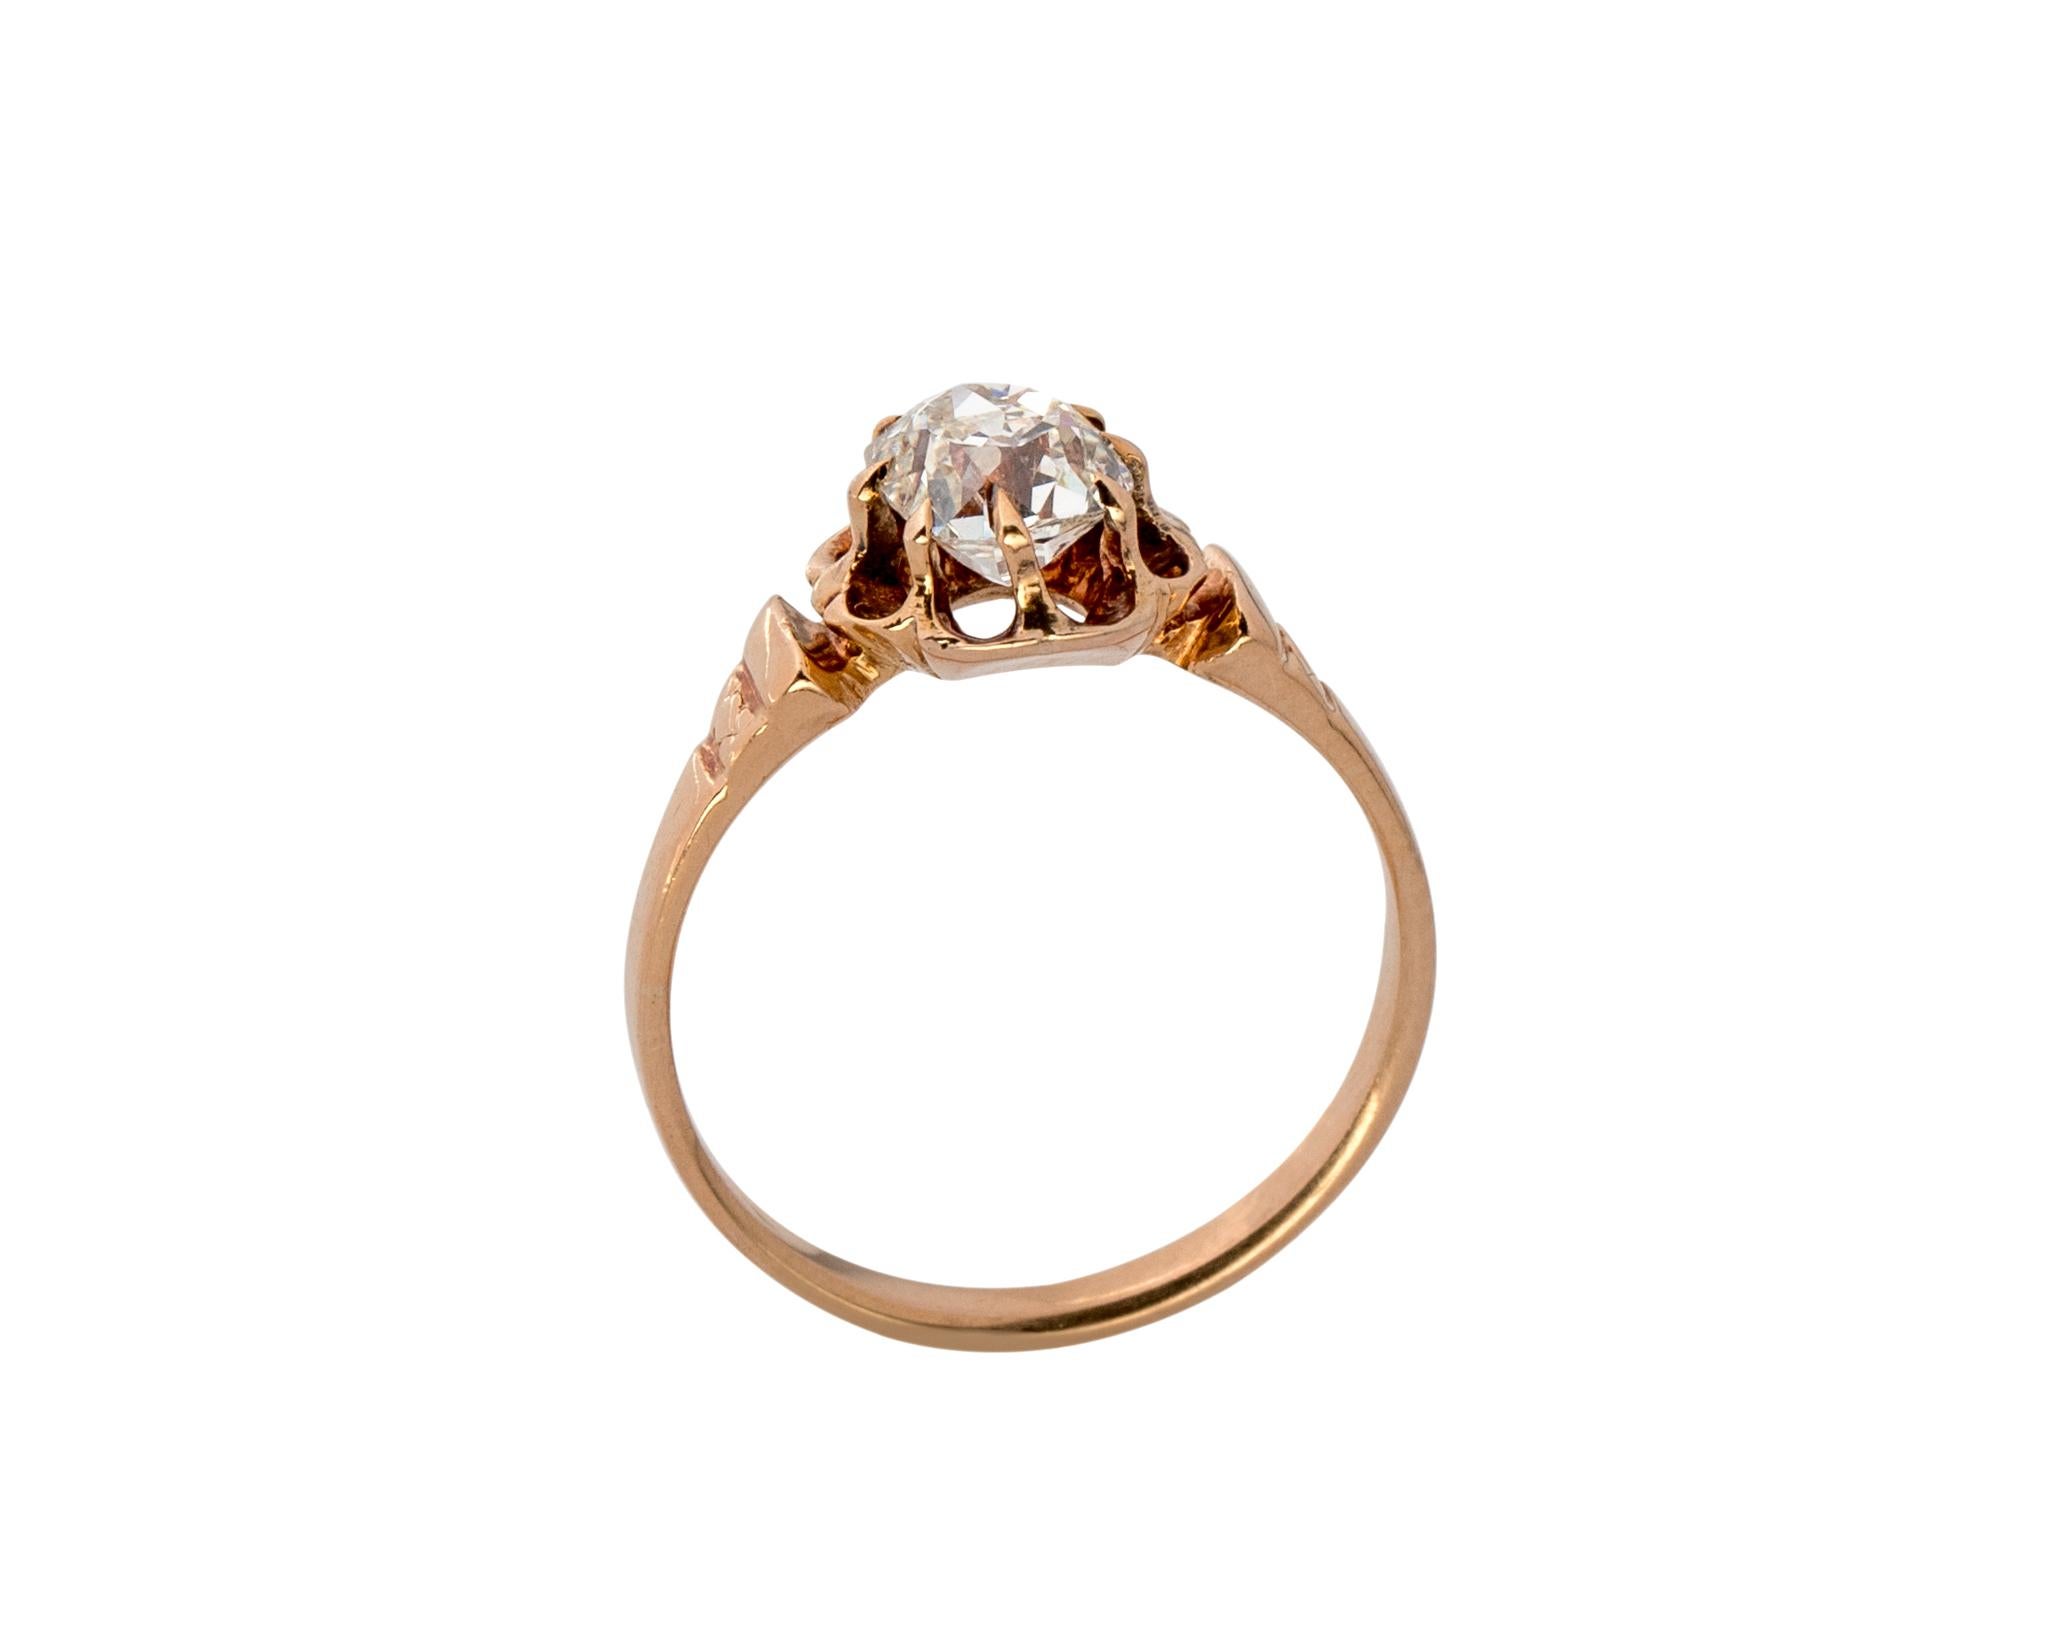 Ring Details:
Metal type: 18 Karat Yellow Gold
Ring Size: 6 (resizable)
Weight: 2.5 grams

Diamond Details:
Carat: 1 Carat 
Color: J
Clarity: vs1
Cut: Old Mine Cushion

Features a beautiful 1 Carat Cushion Cut center diamond, held by 9 prongs in